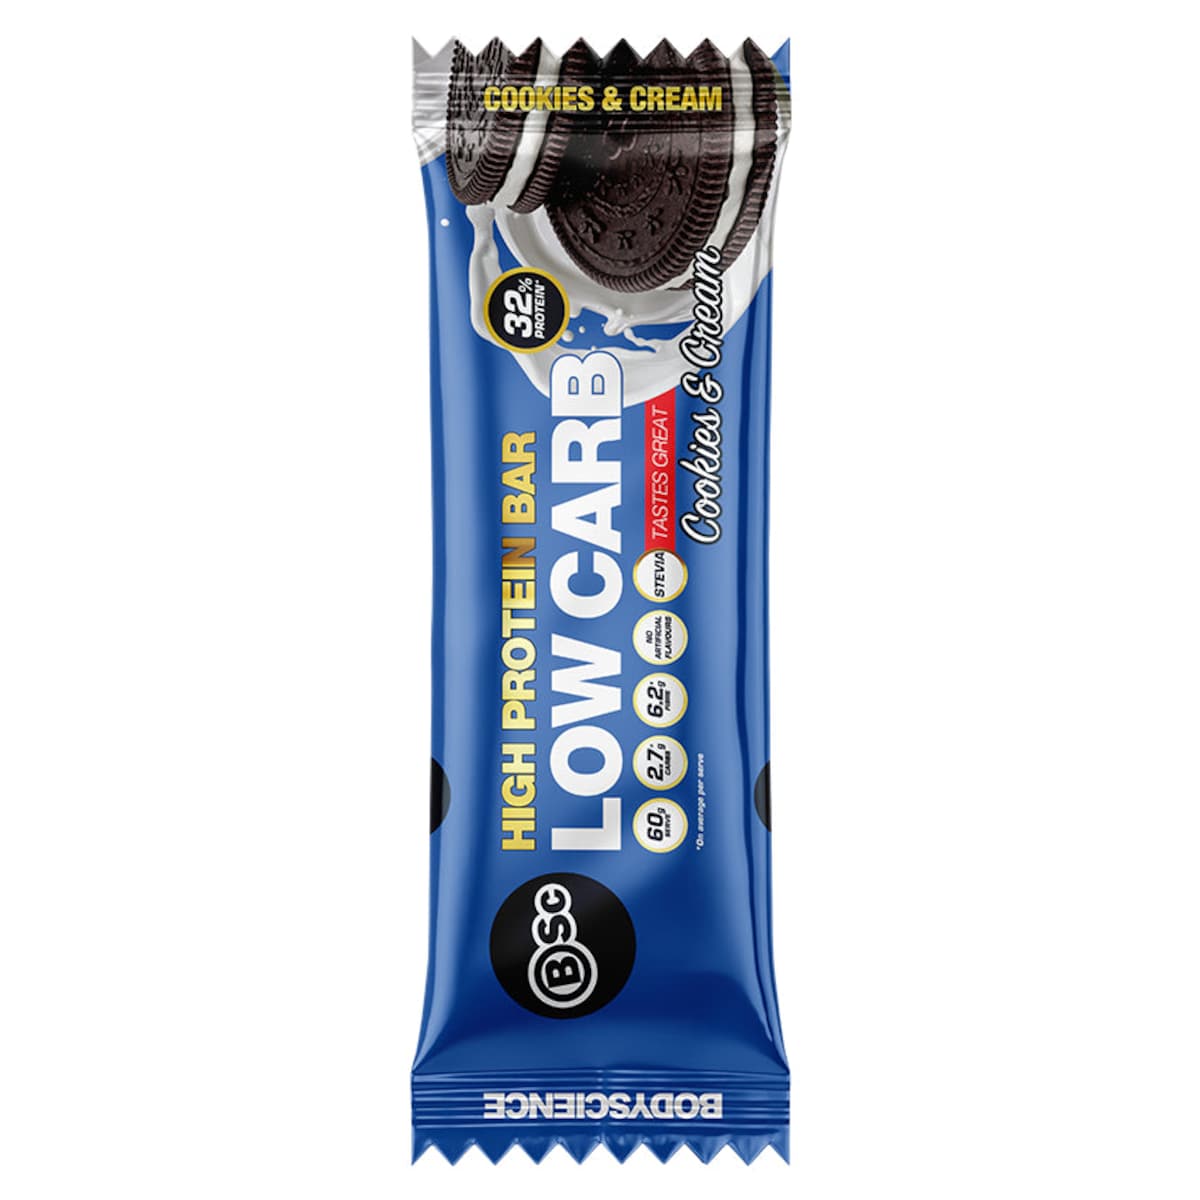 BSc Body Science High Protein Low Carb Bar Cookies & Cream 12 x 60g